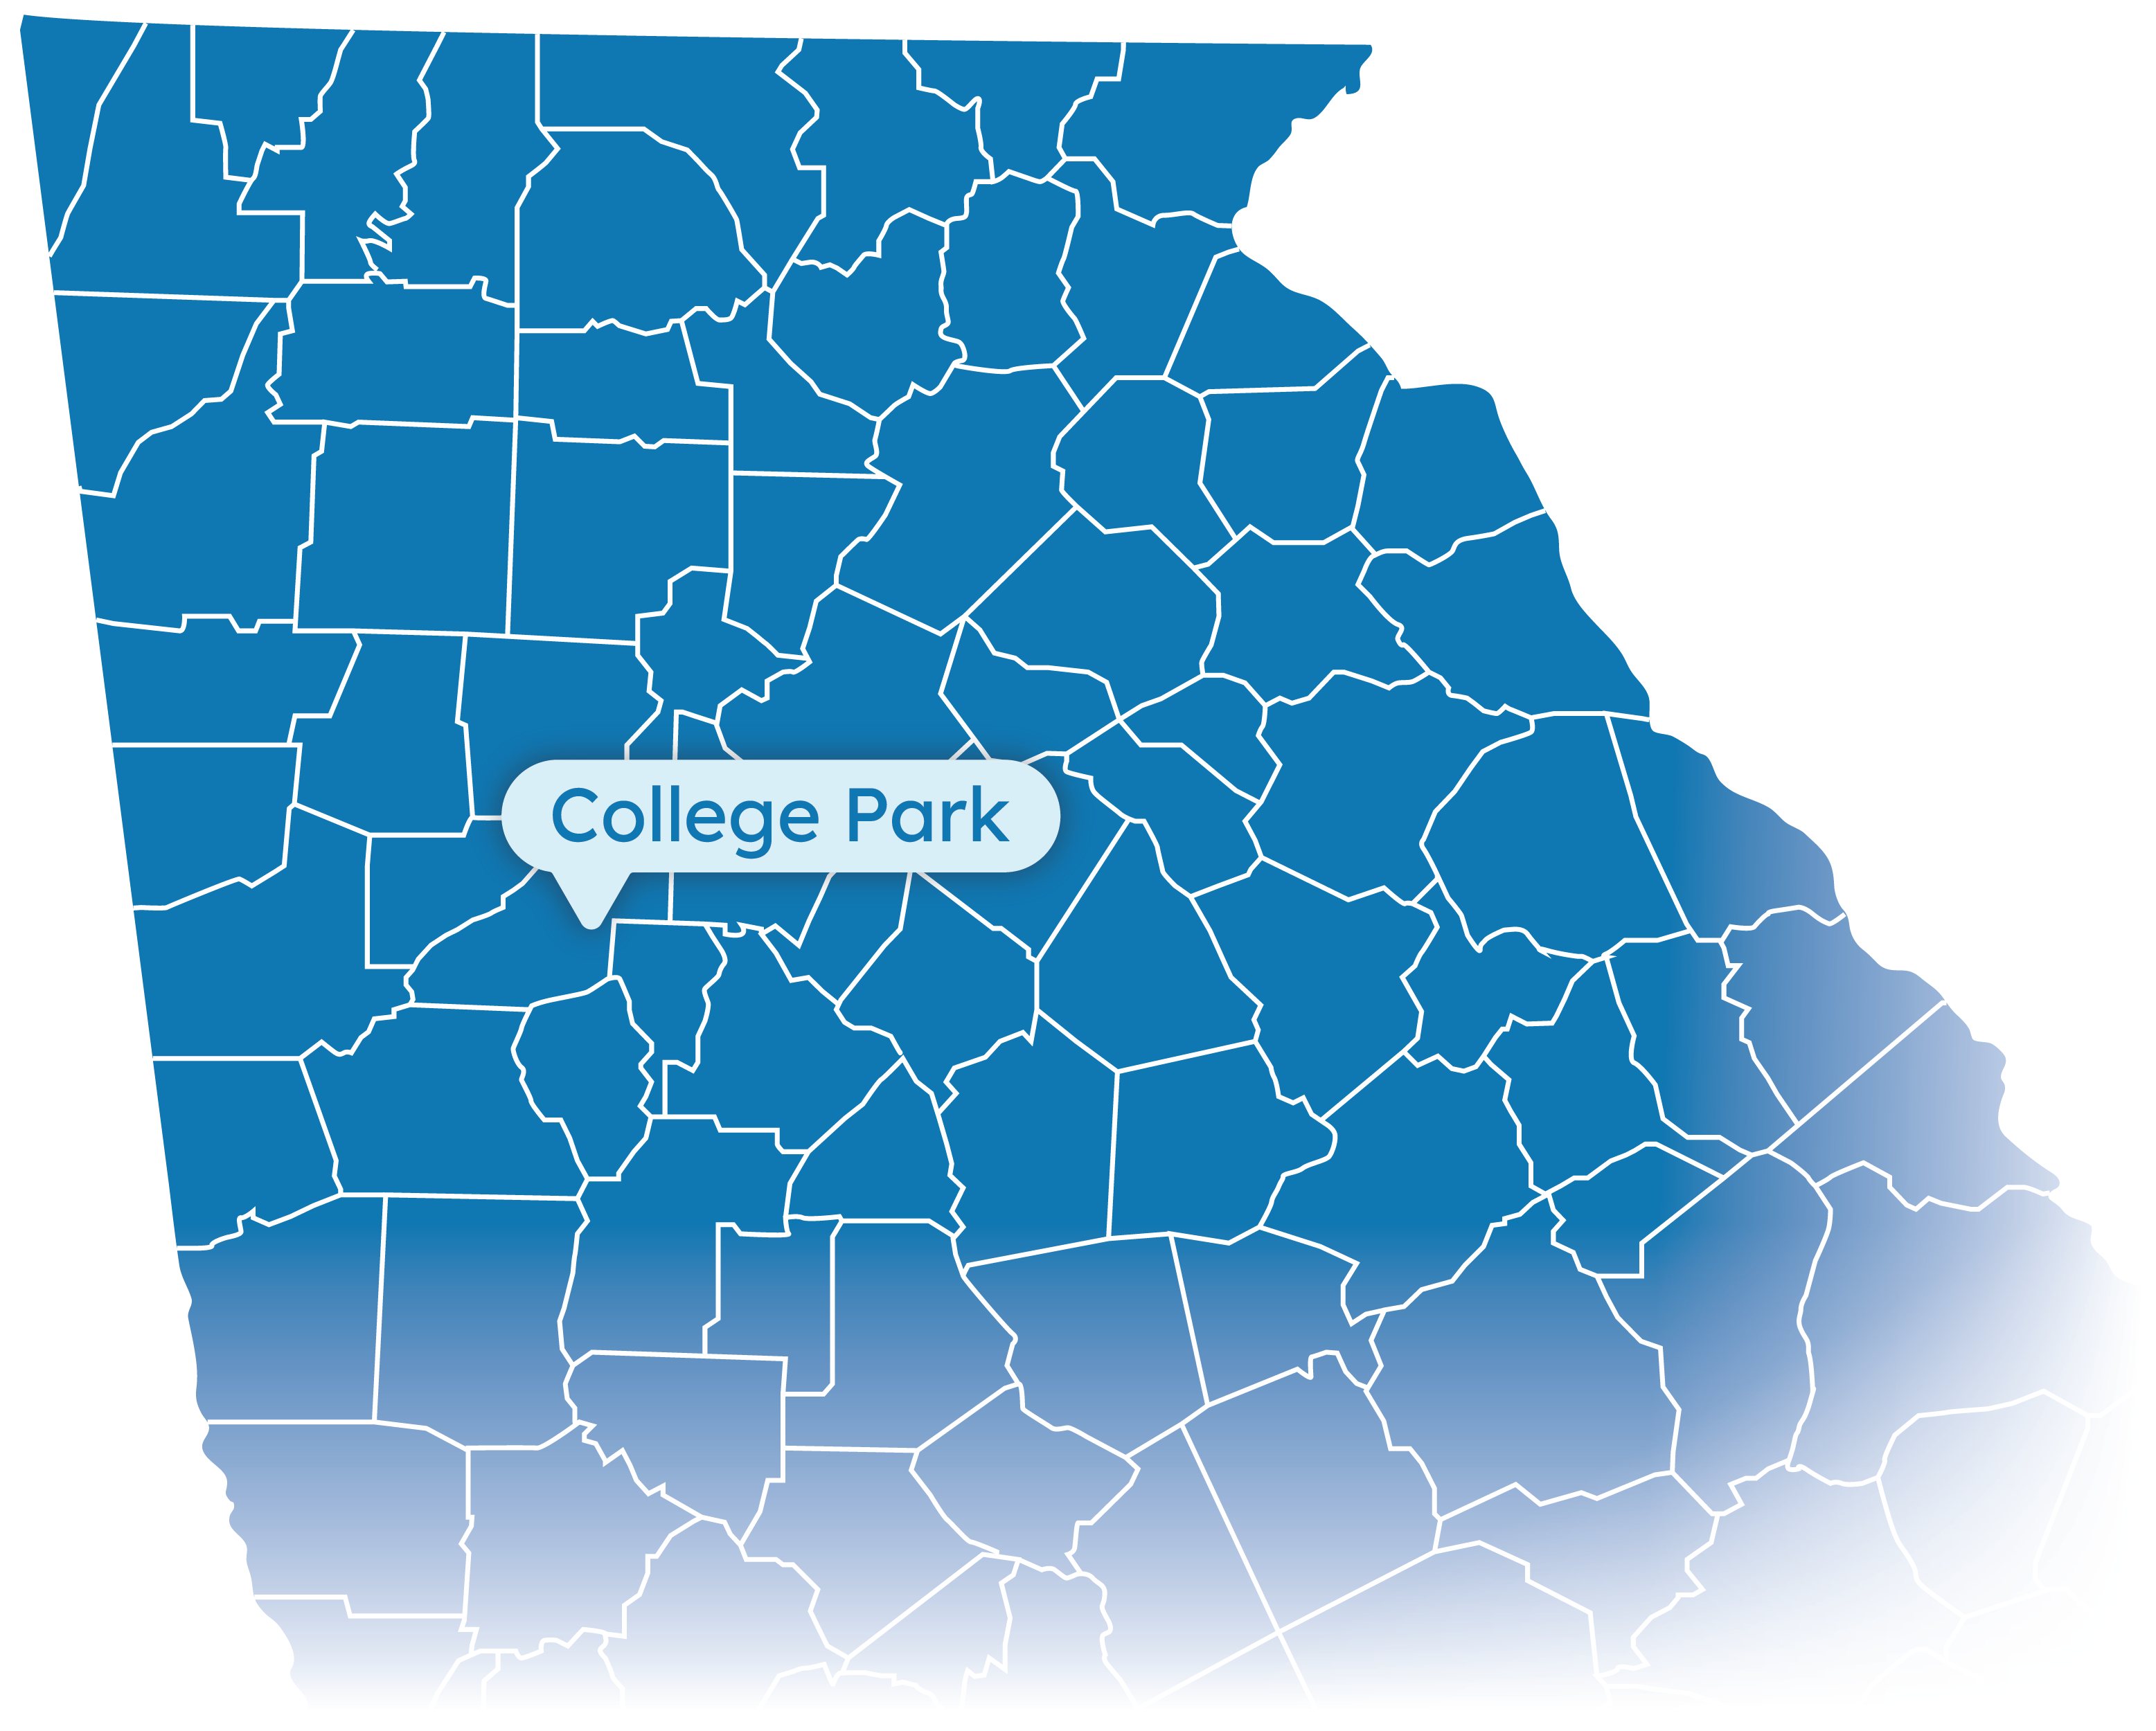 Map of Georgia with College Park